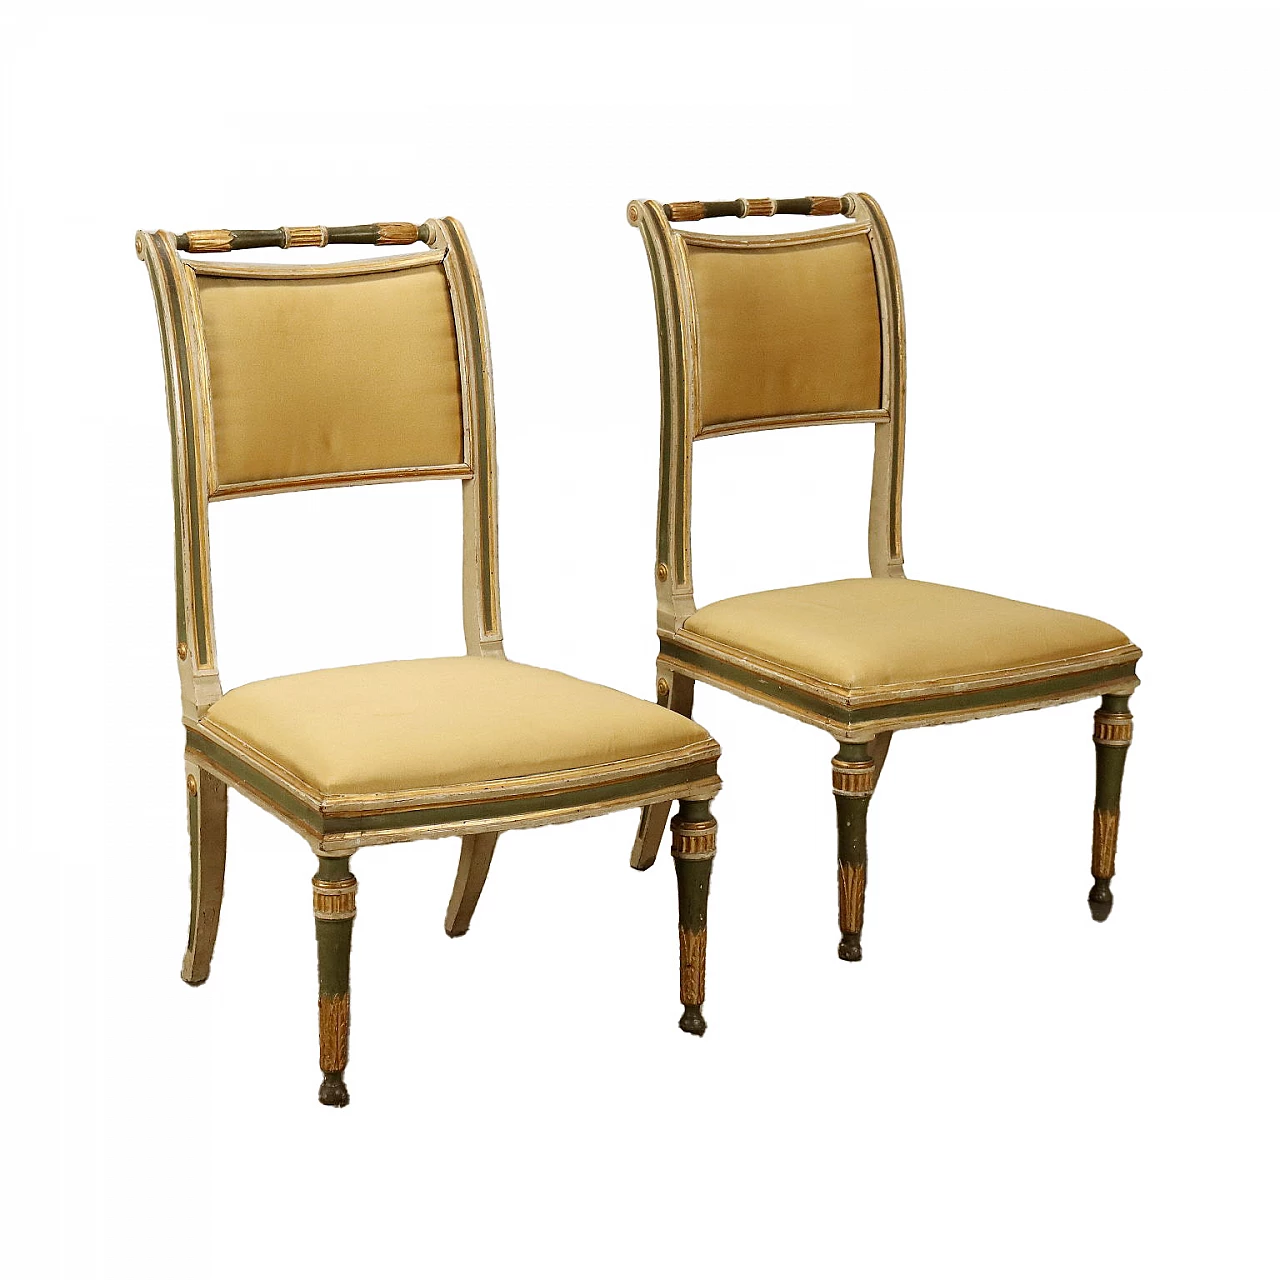 Pair of Empire chairs in lacquered and gilded wood, 19th century 1